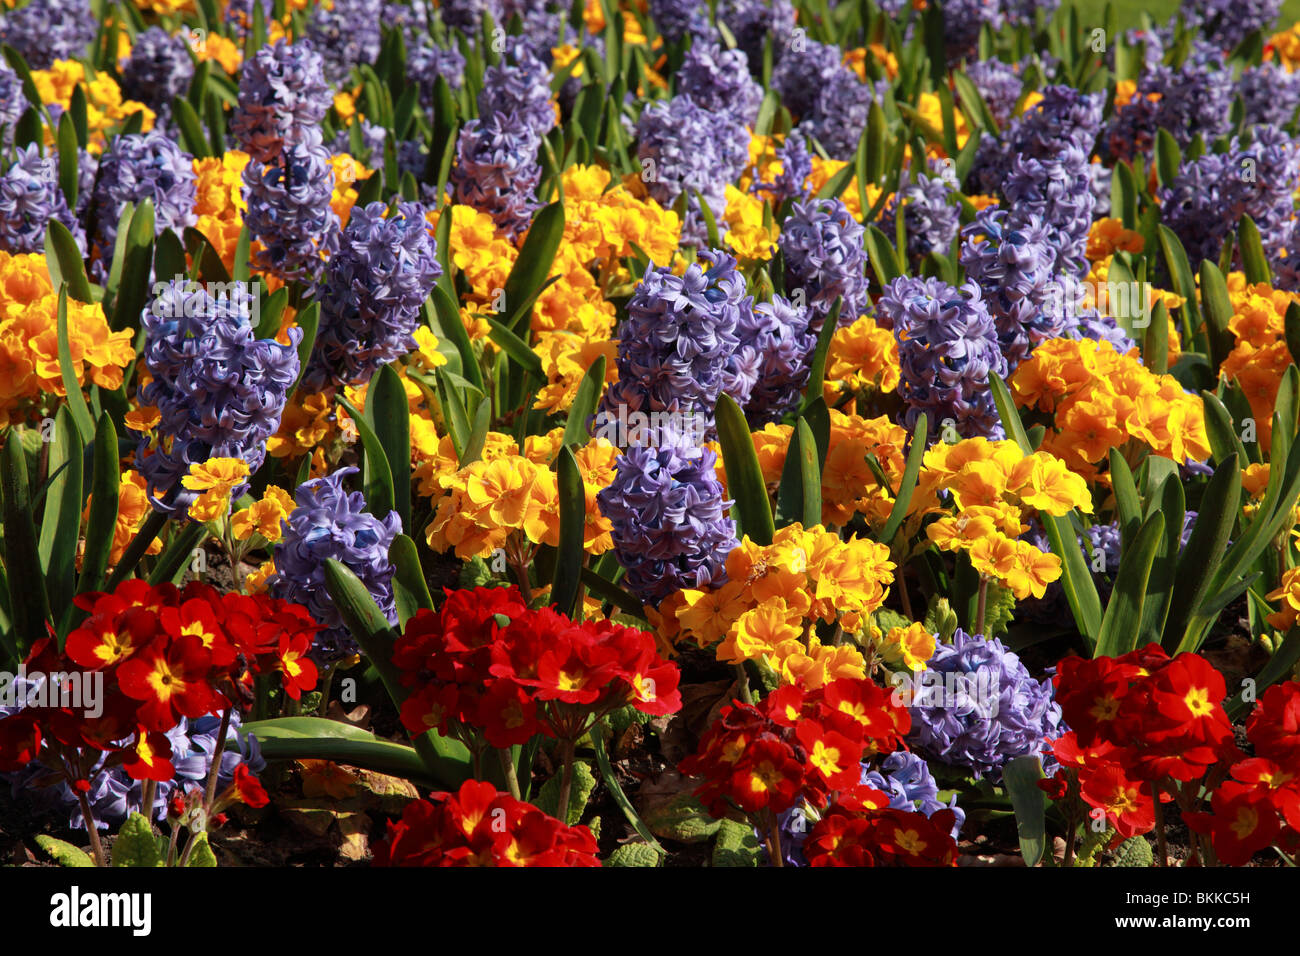 Close up of a planted display of brightly coloured spring flowers Stock Photo